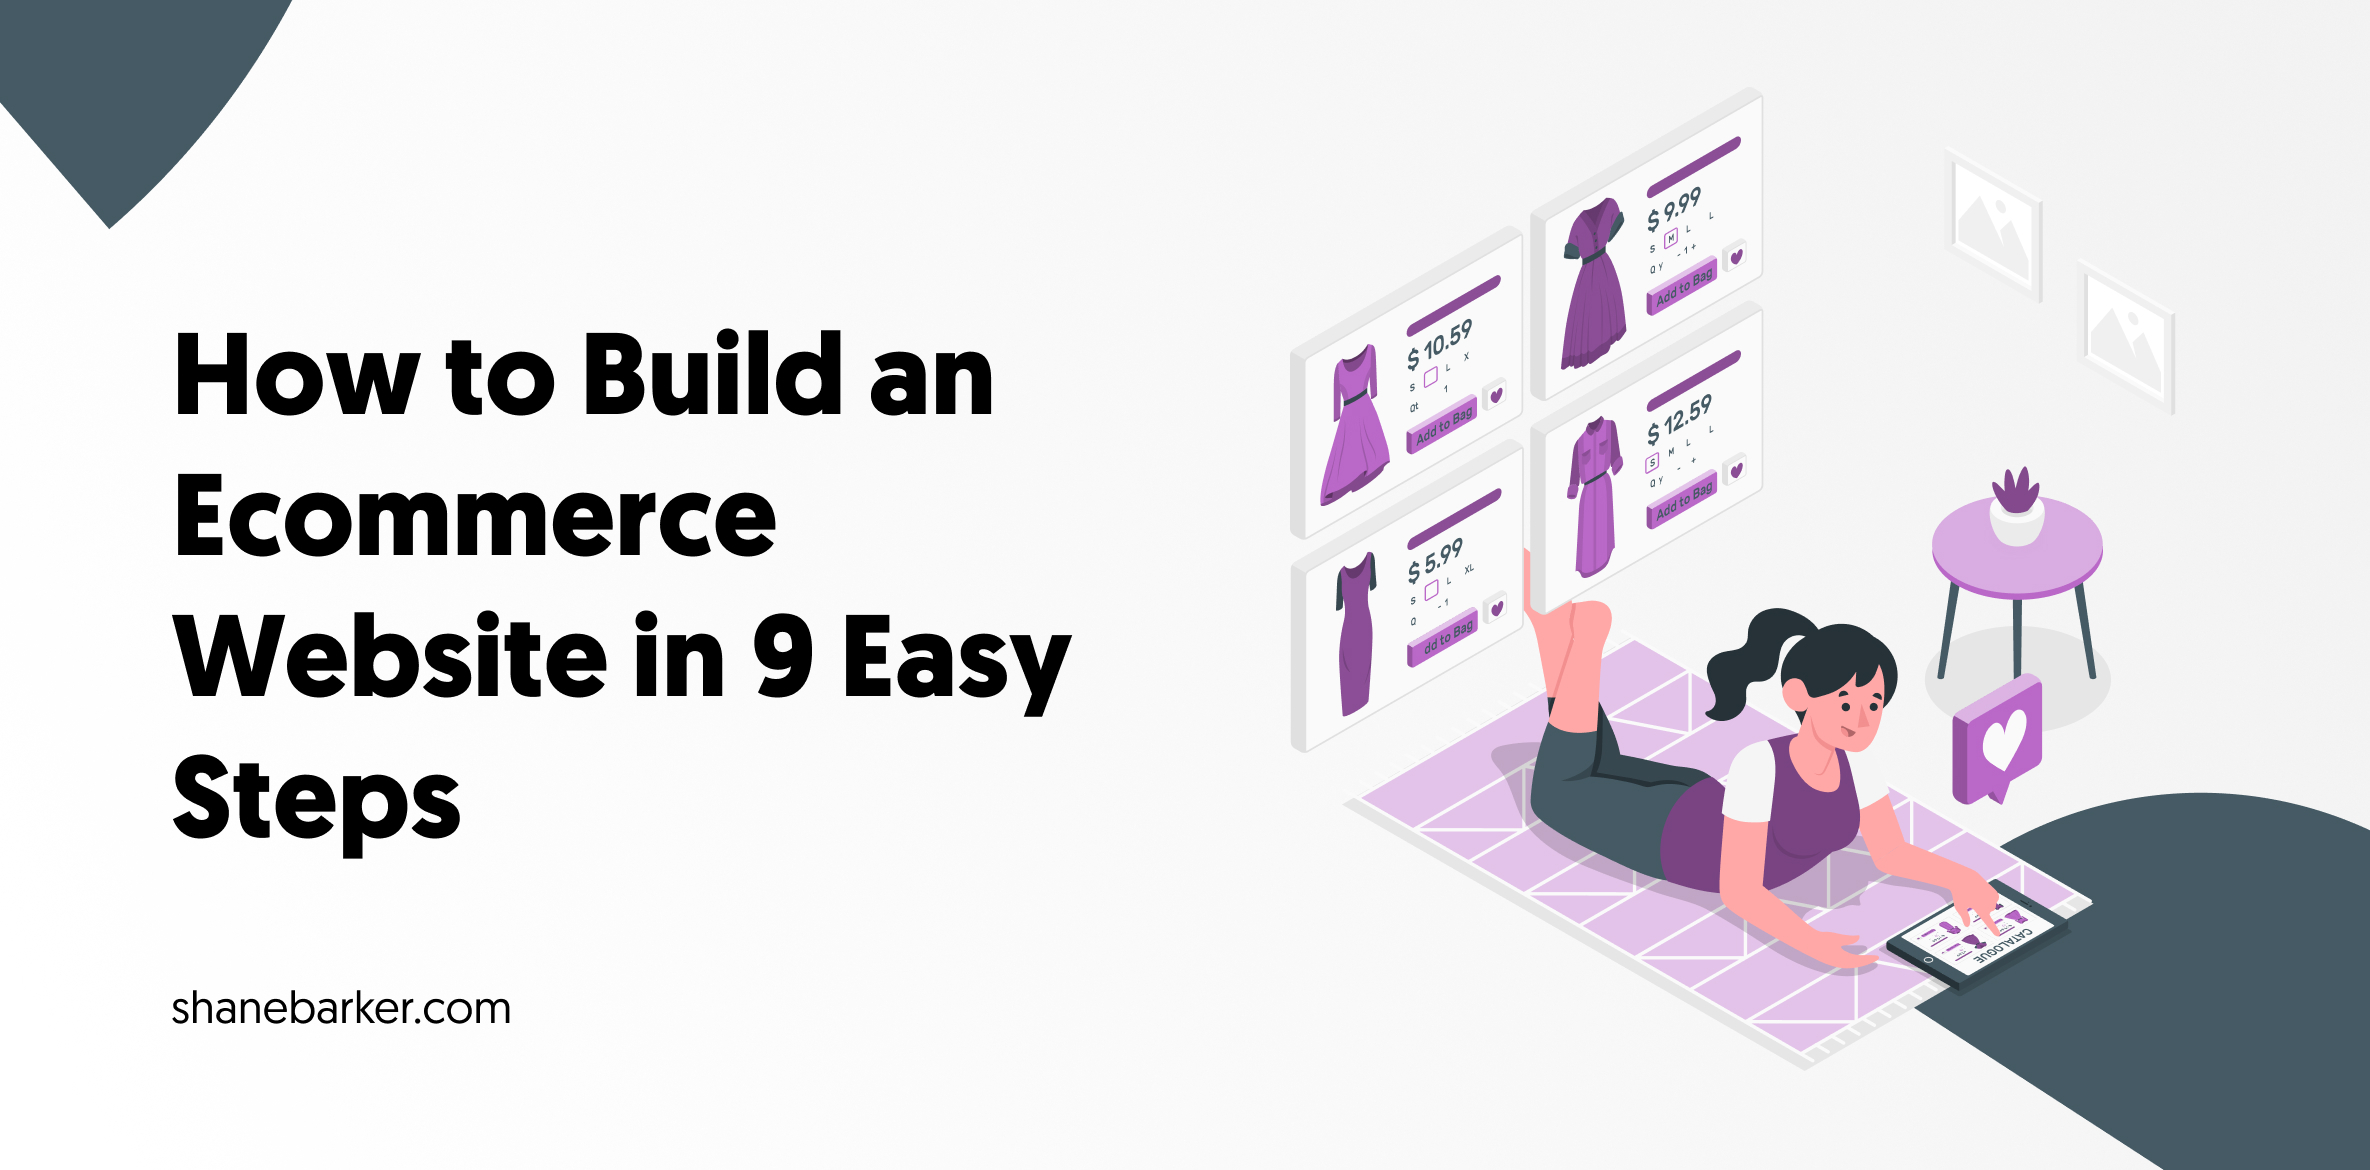 How to Build an Ecommerce Website in 9 Easy Steps